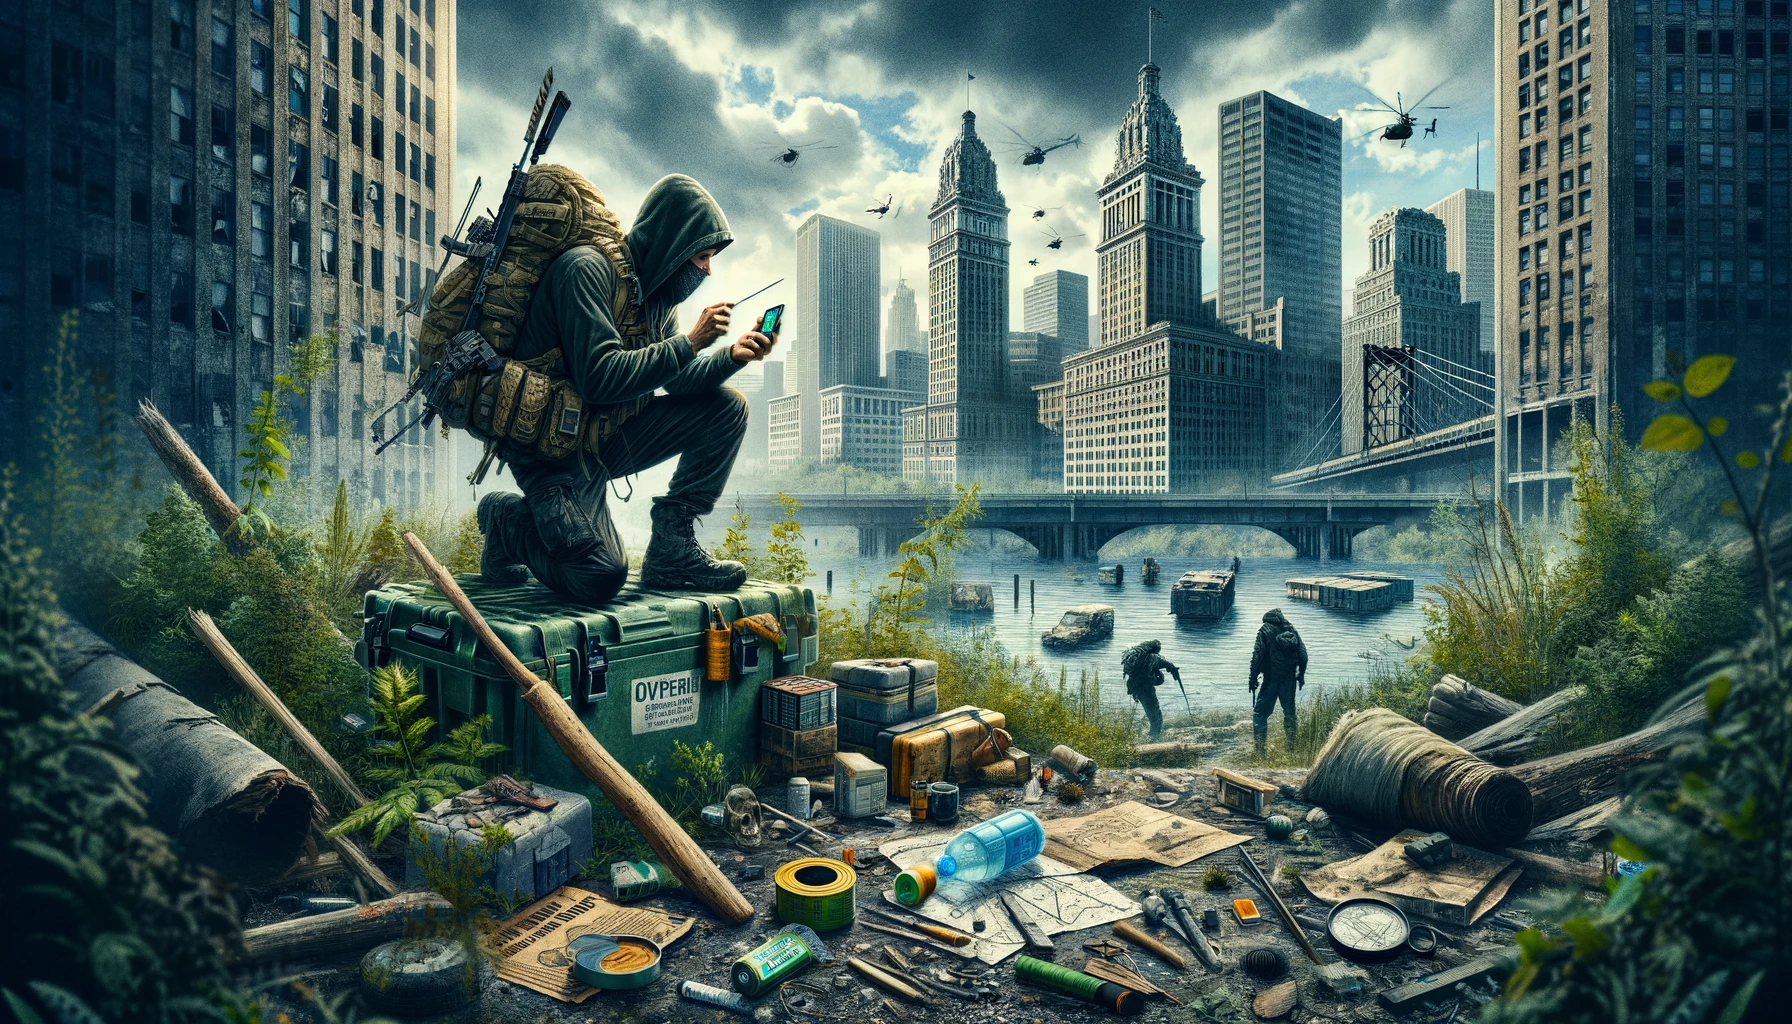 Urban prepper applying survival techniques in a city with abandoned buildings and overgrown lots, showcasing adaptability and resourcefulness